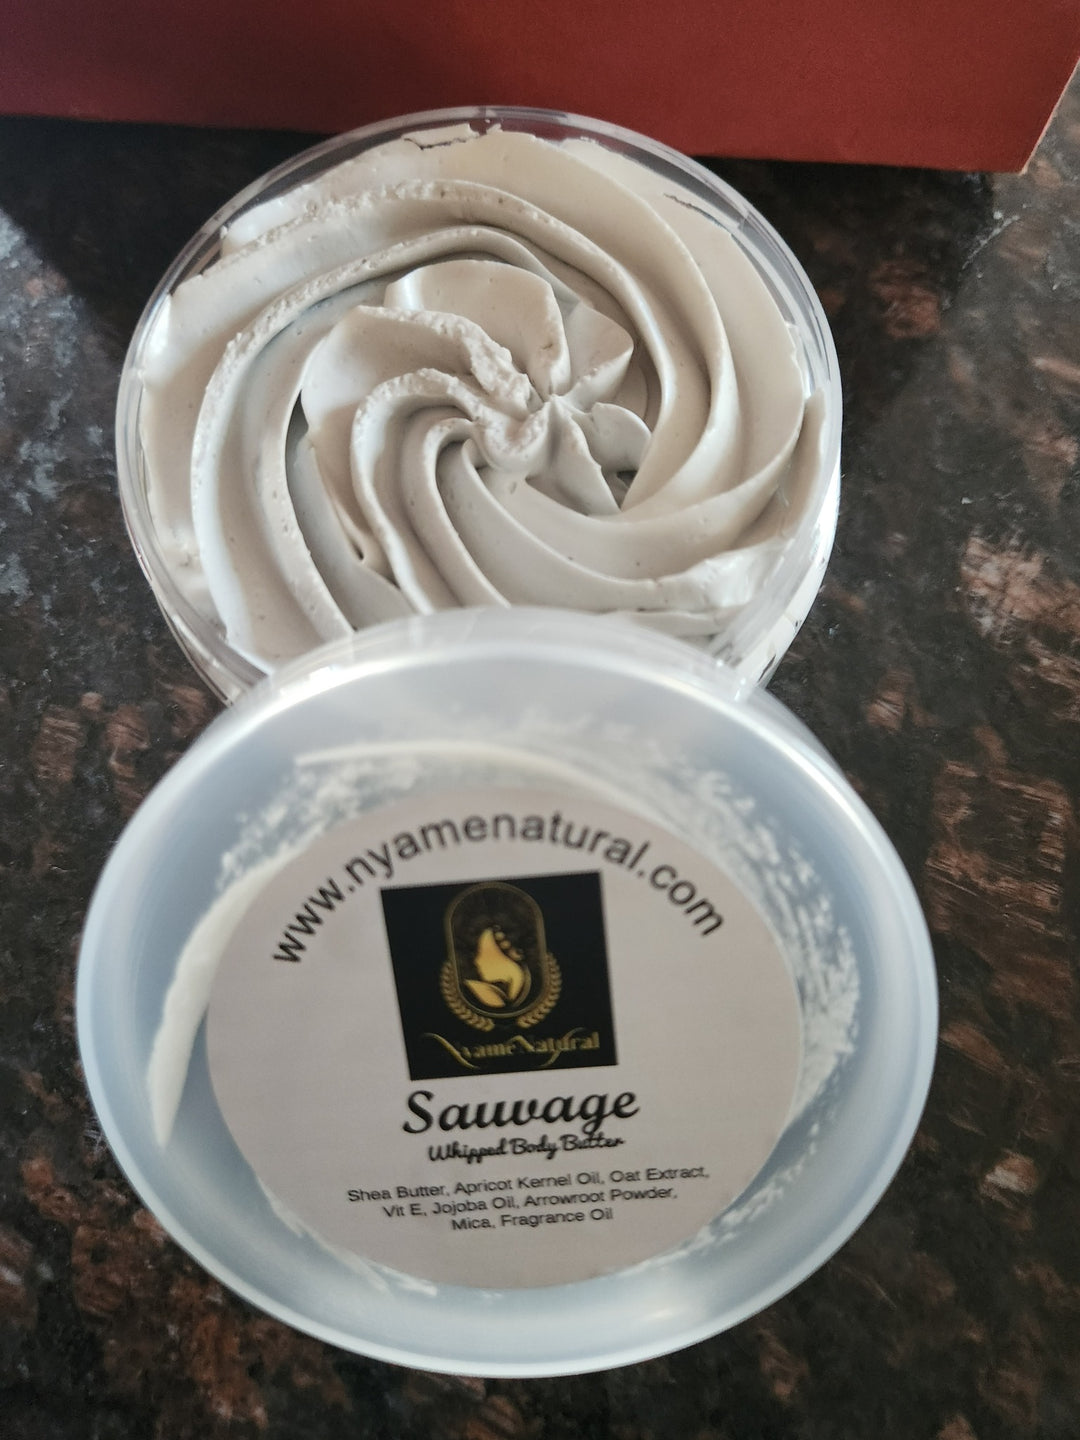 Sauvage Luxury Body Butter